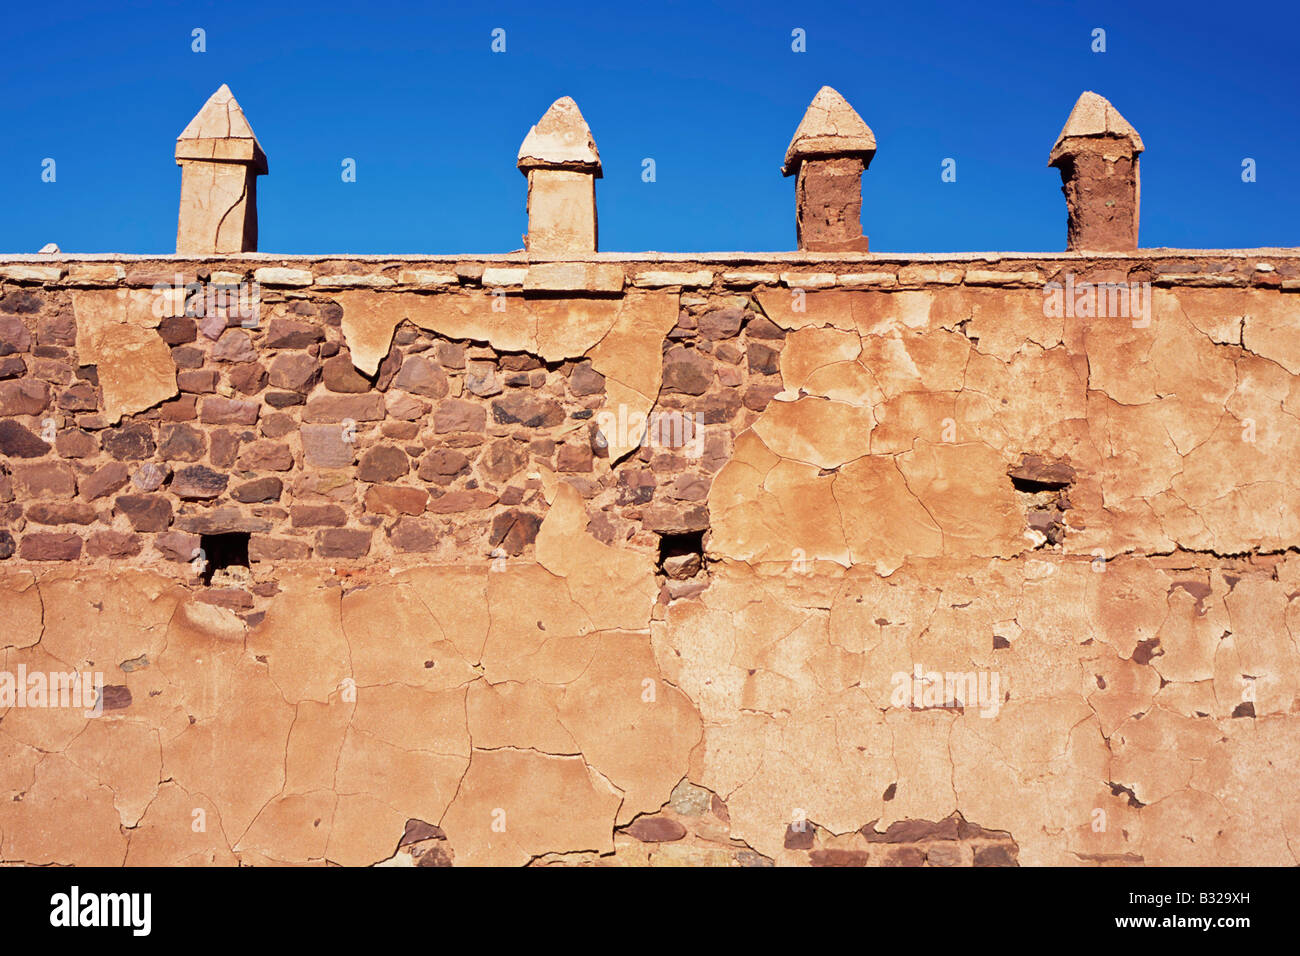 Crenellation along the outer wall of the kasbah at Telouet in Morocco, North Africa Stock Photo